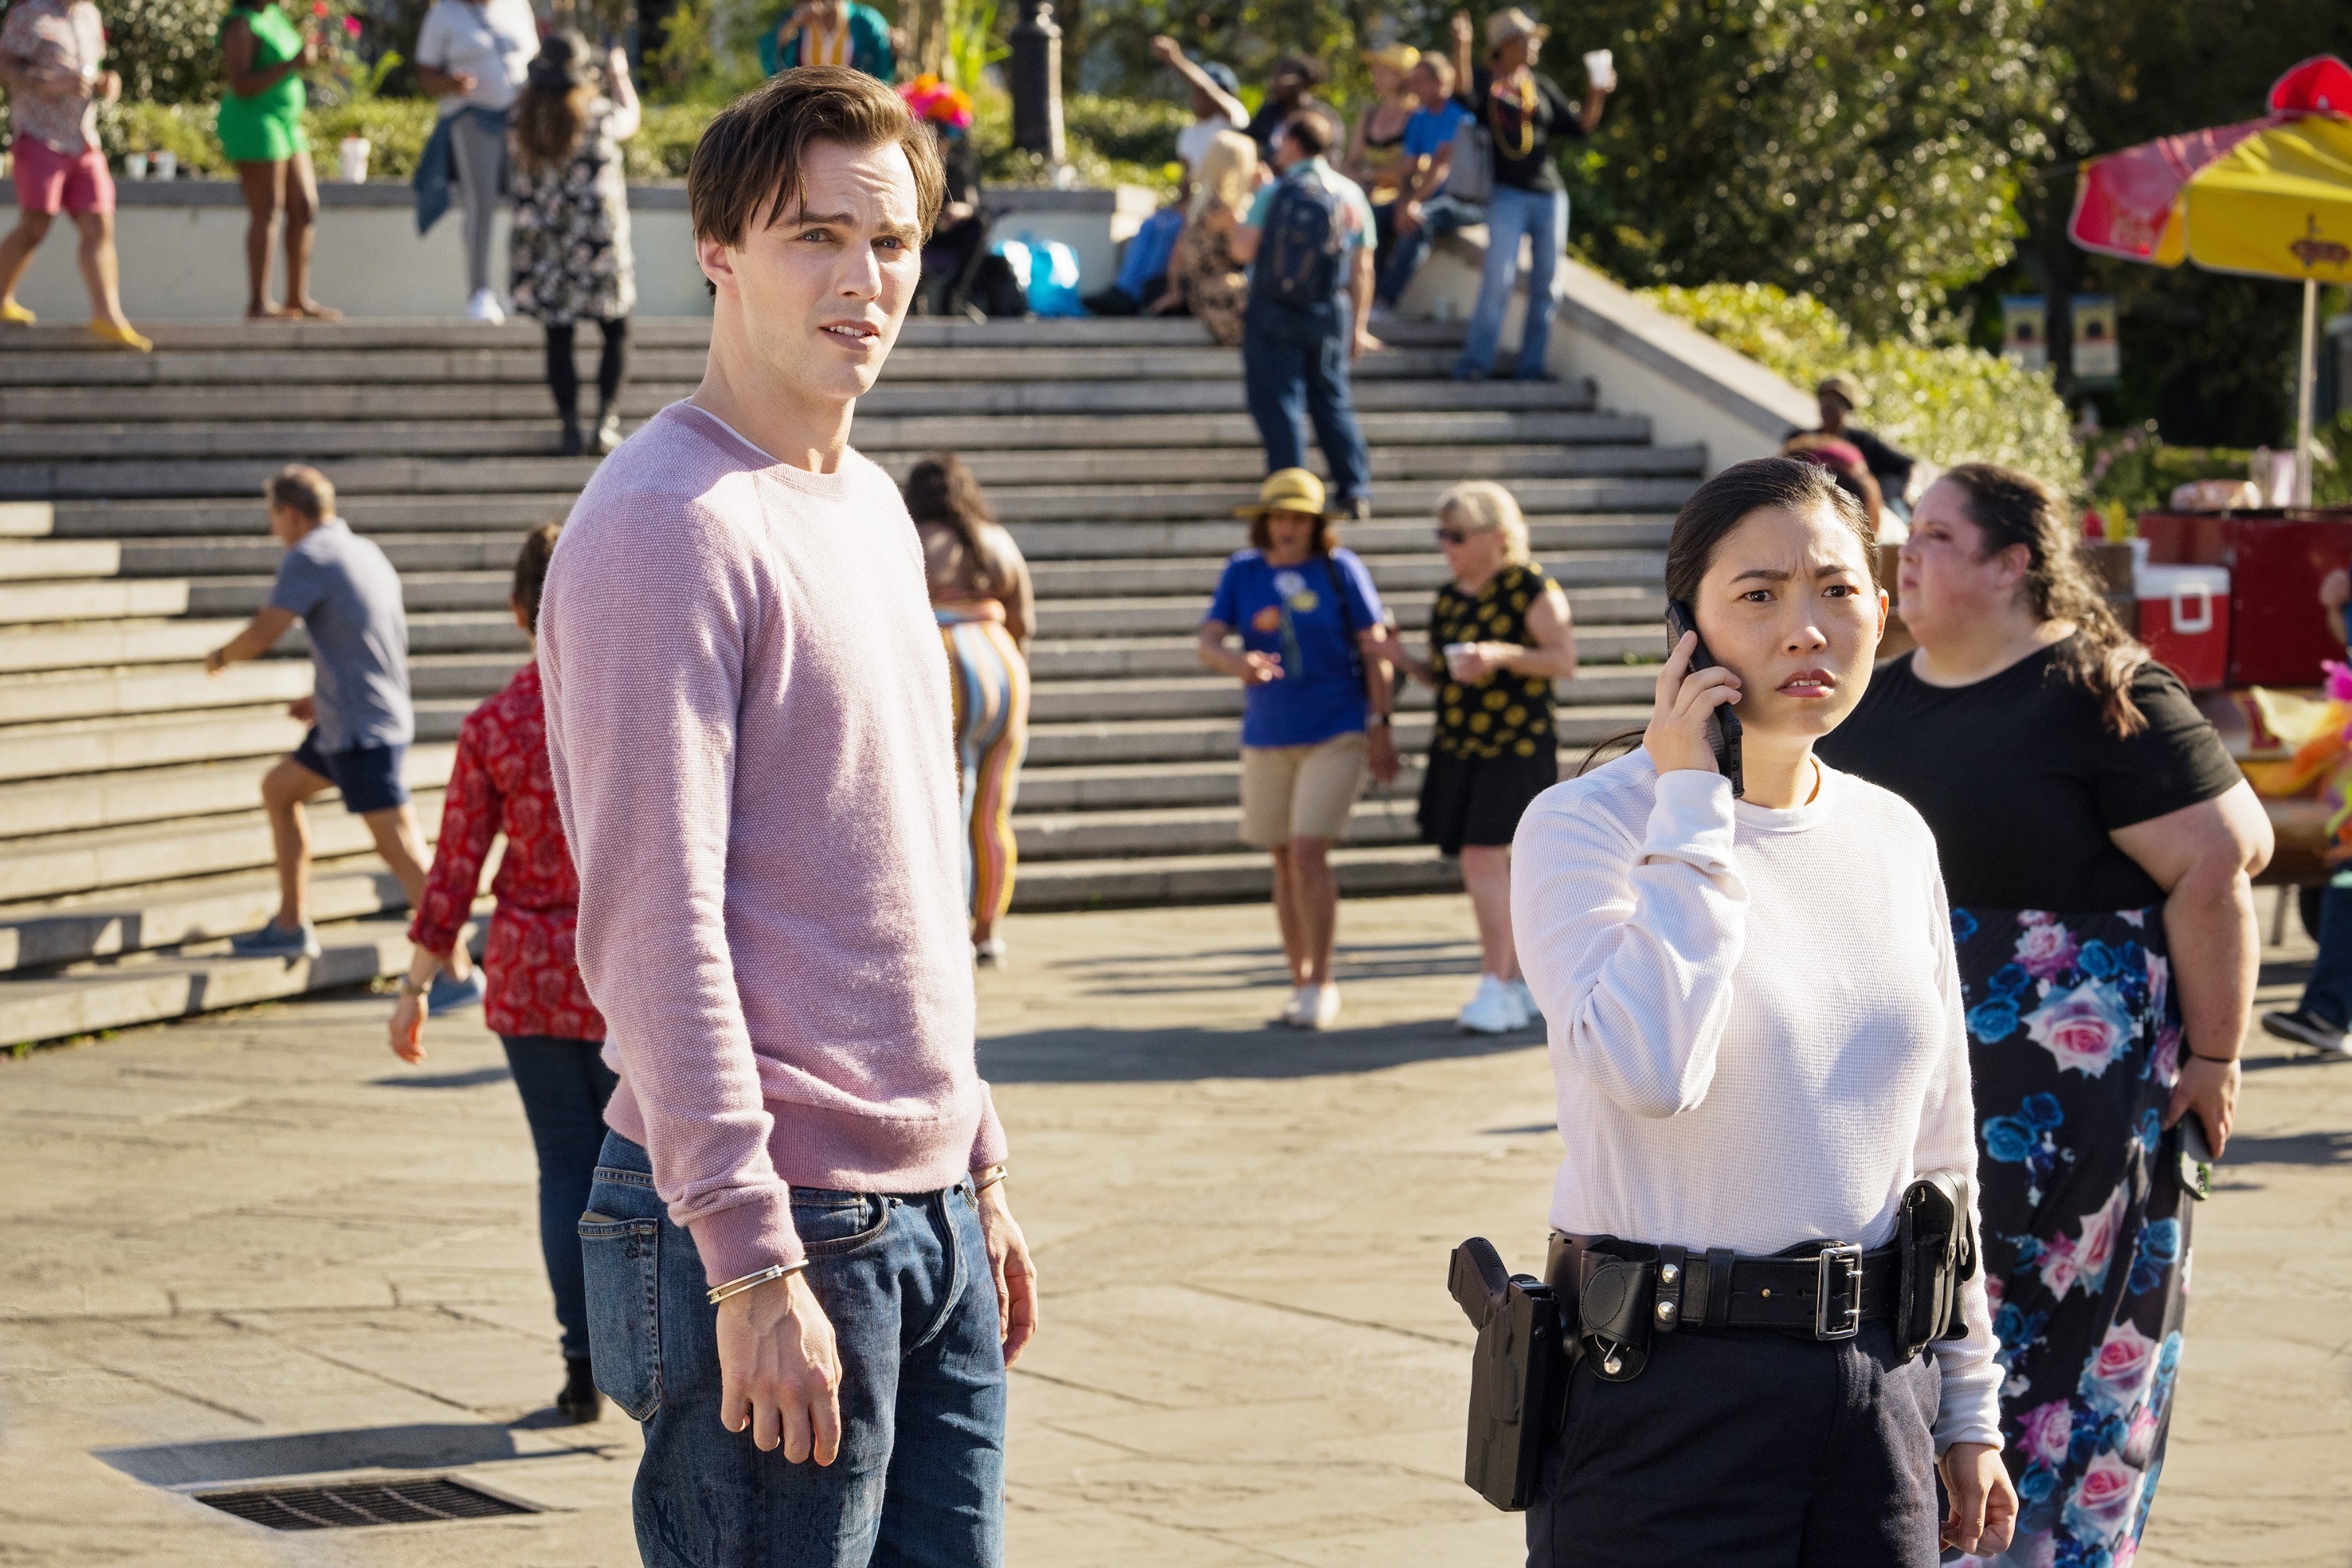 Nicholas Hoult and Awkwafina take a call in a crowded outdoor plaza in Renfield